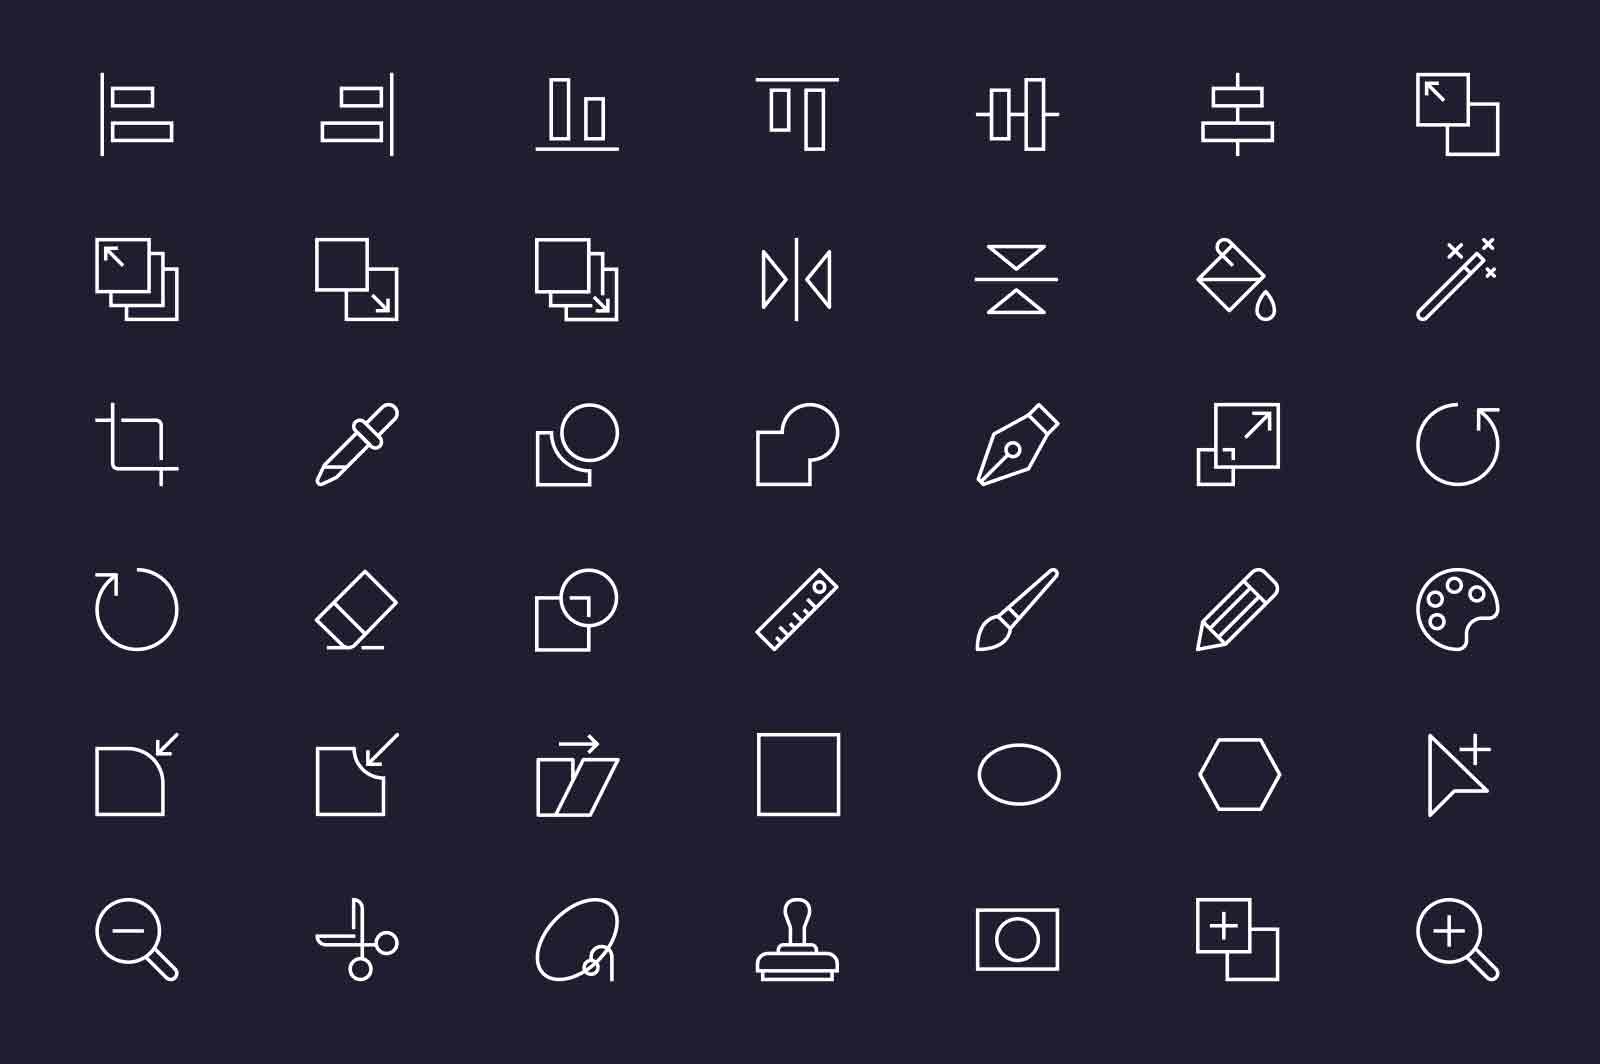 Tools to creative edit file icons set vector illustration. Brush, stamp, color palette and other line icon. Dark background